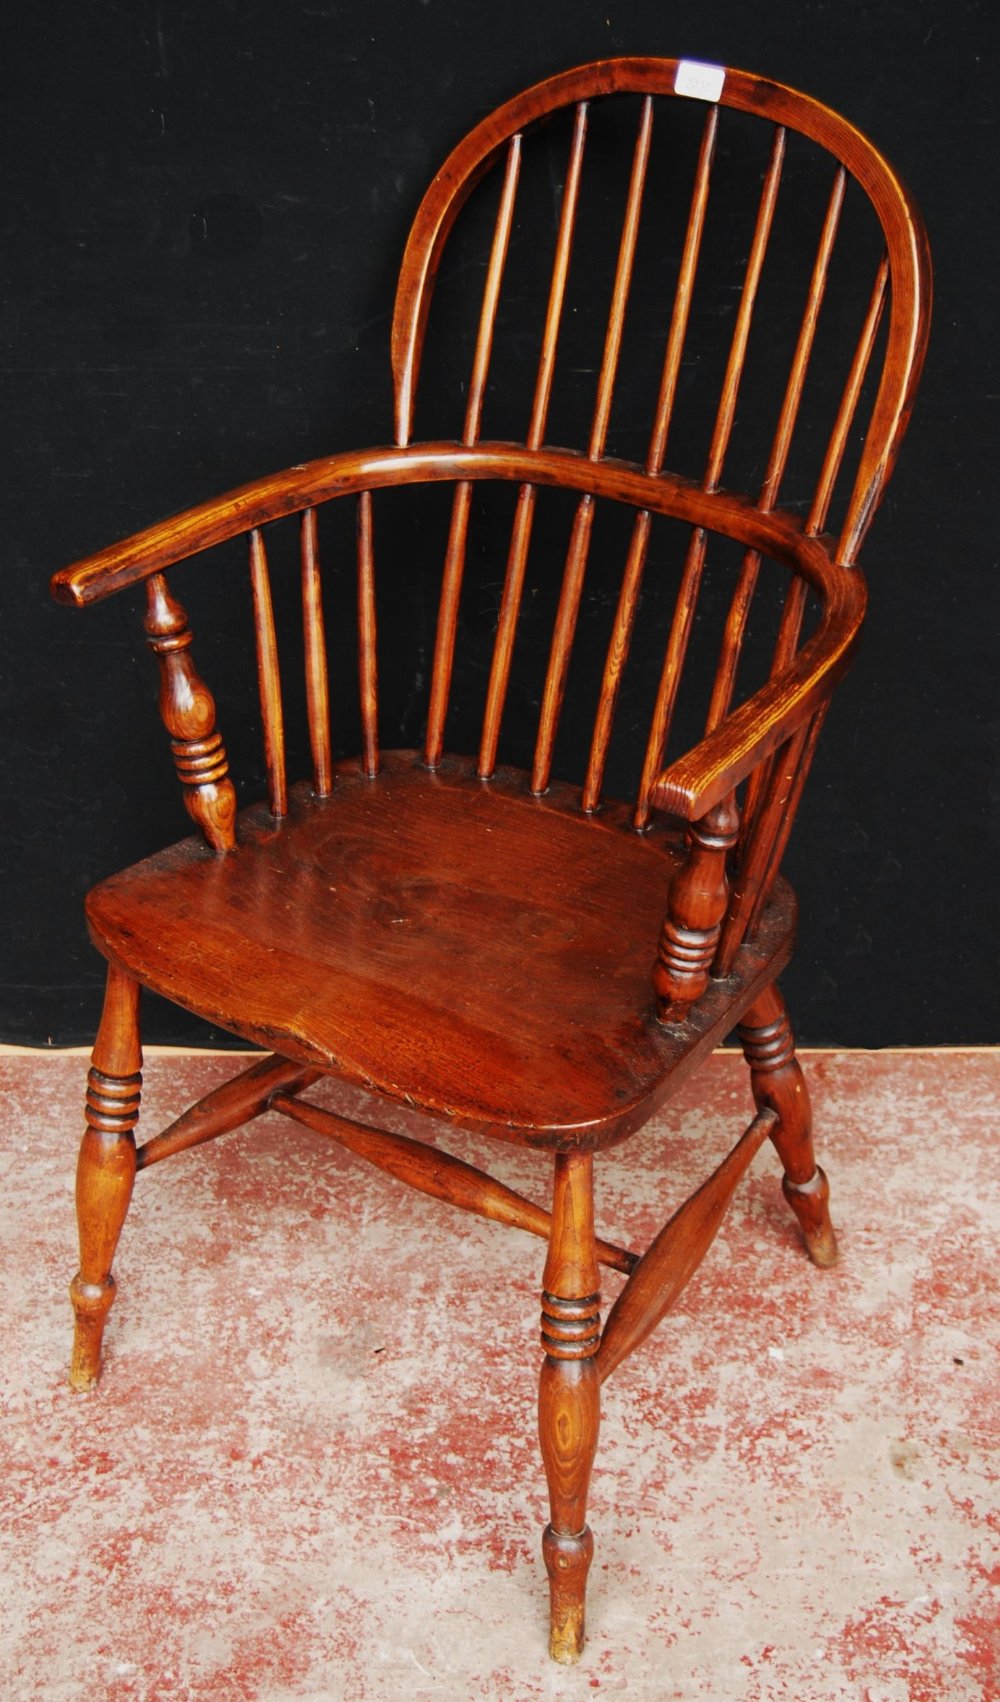 Antique ash and elm Windsor armchair with hoop frame, stick back and solid seat, on turned